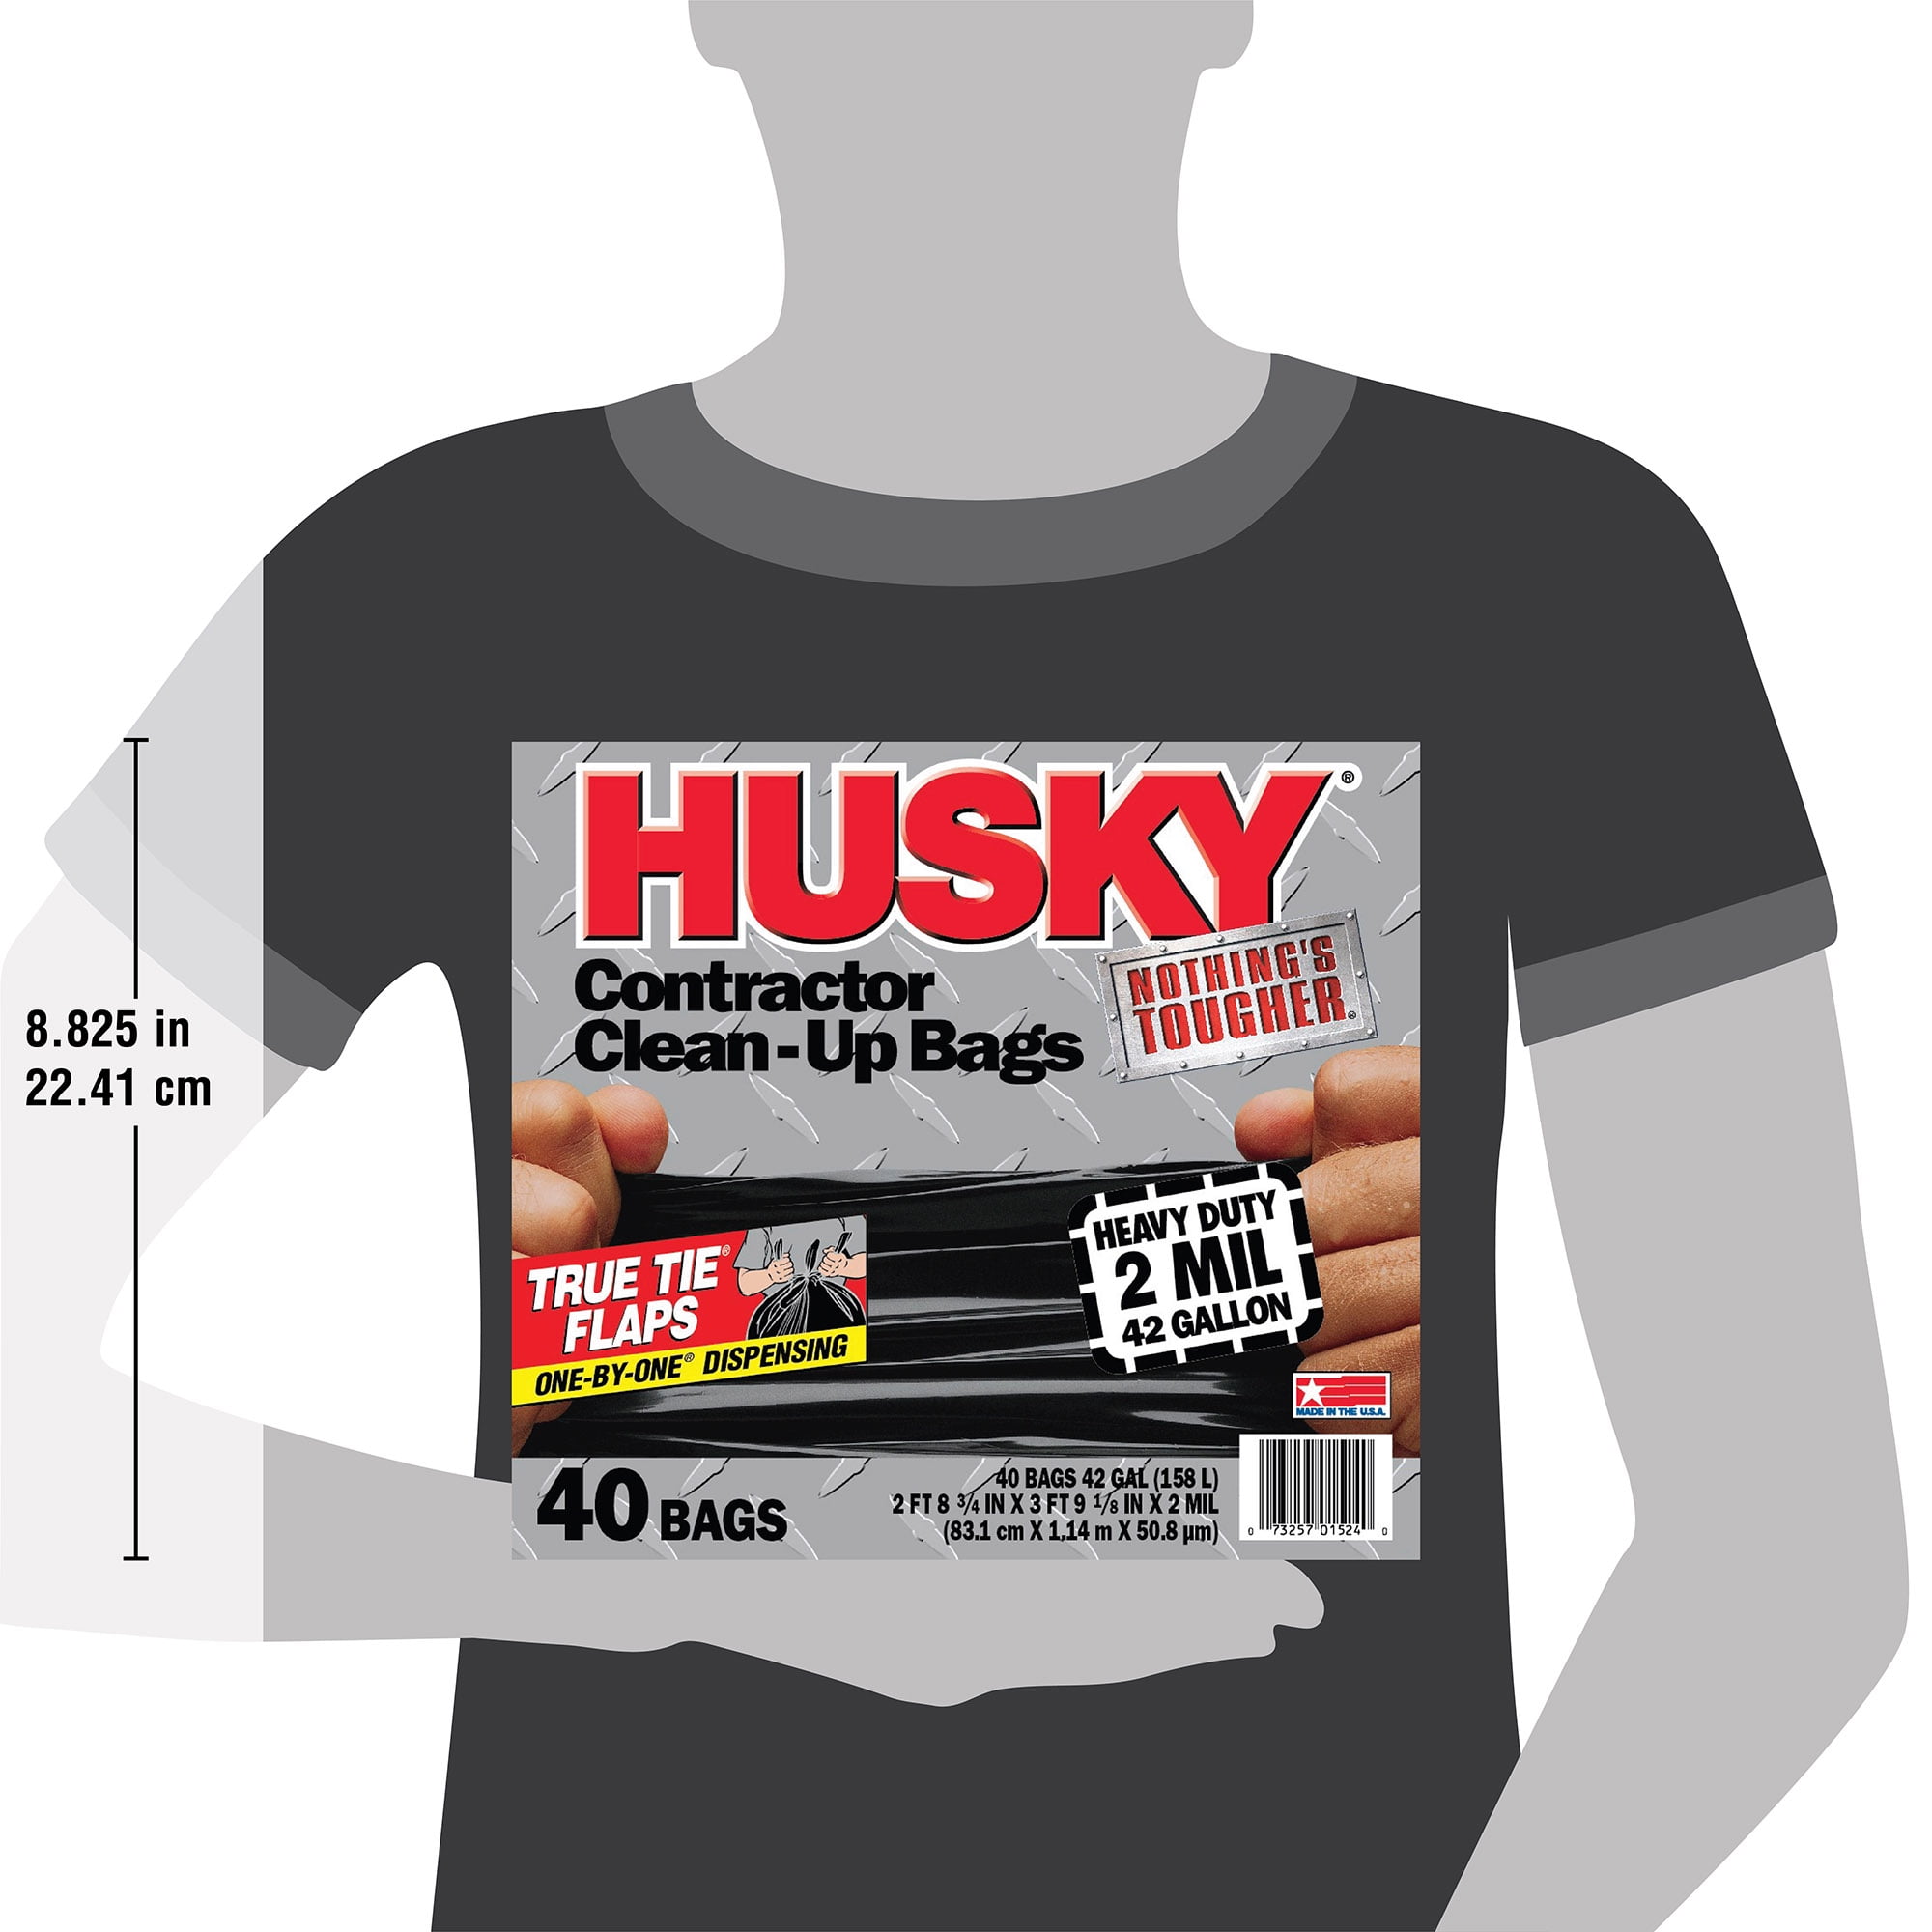 HUSKY CONTRACTOR PACK CLEAN-UP BAGS TRASH HEAVY DUTY 3mill 42